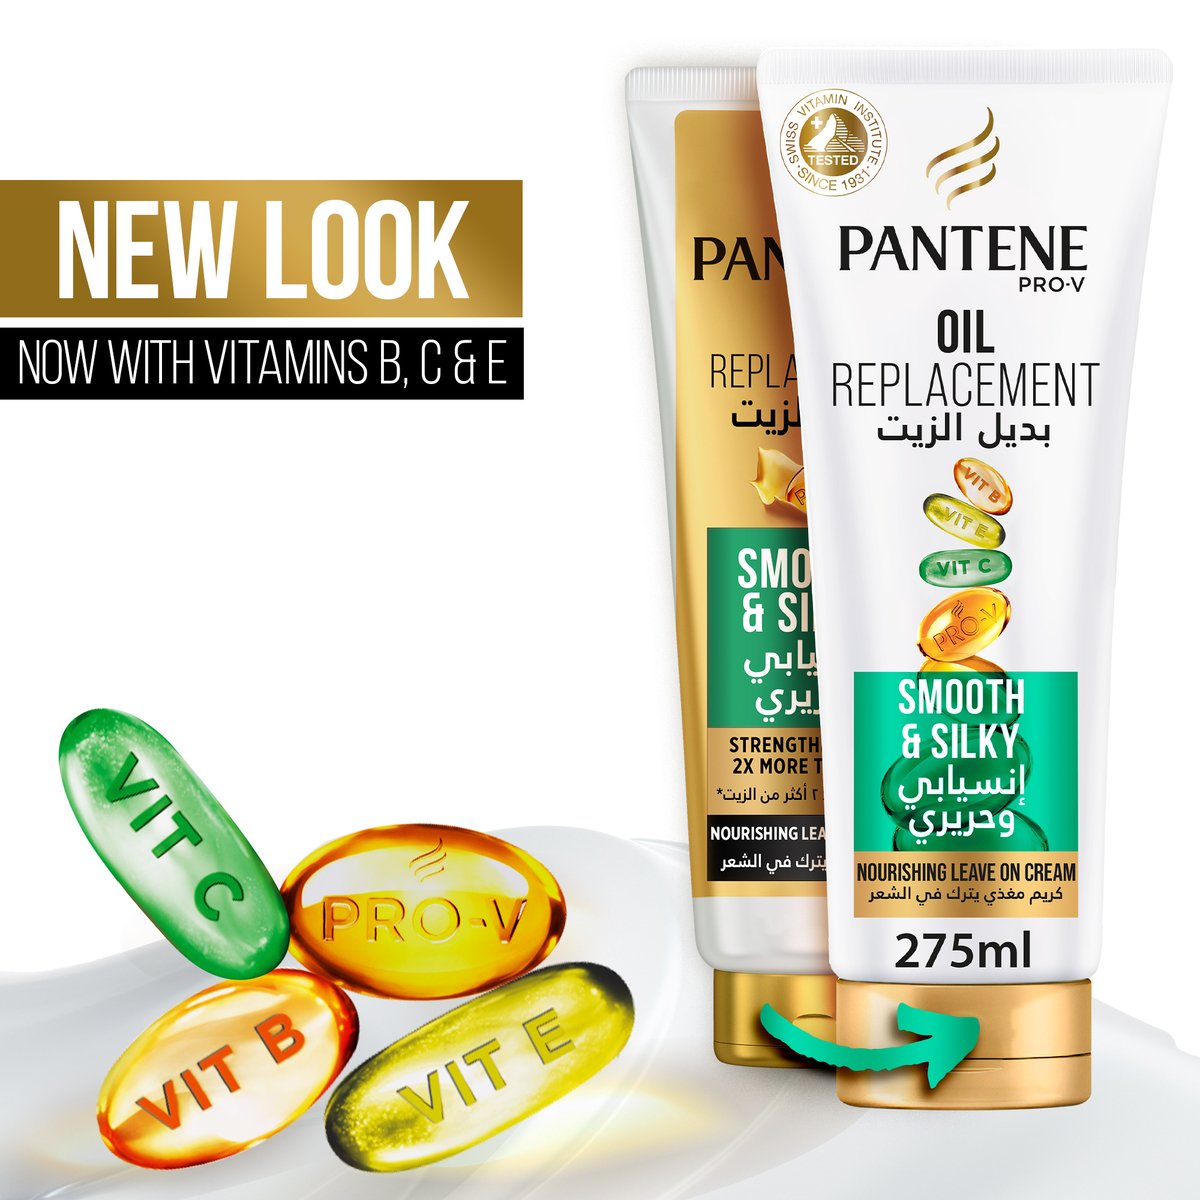 Pantene Pro-V Hair Oil Replacement Smooth & Silky Leave On Cream Value Pack 275ml